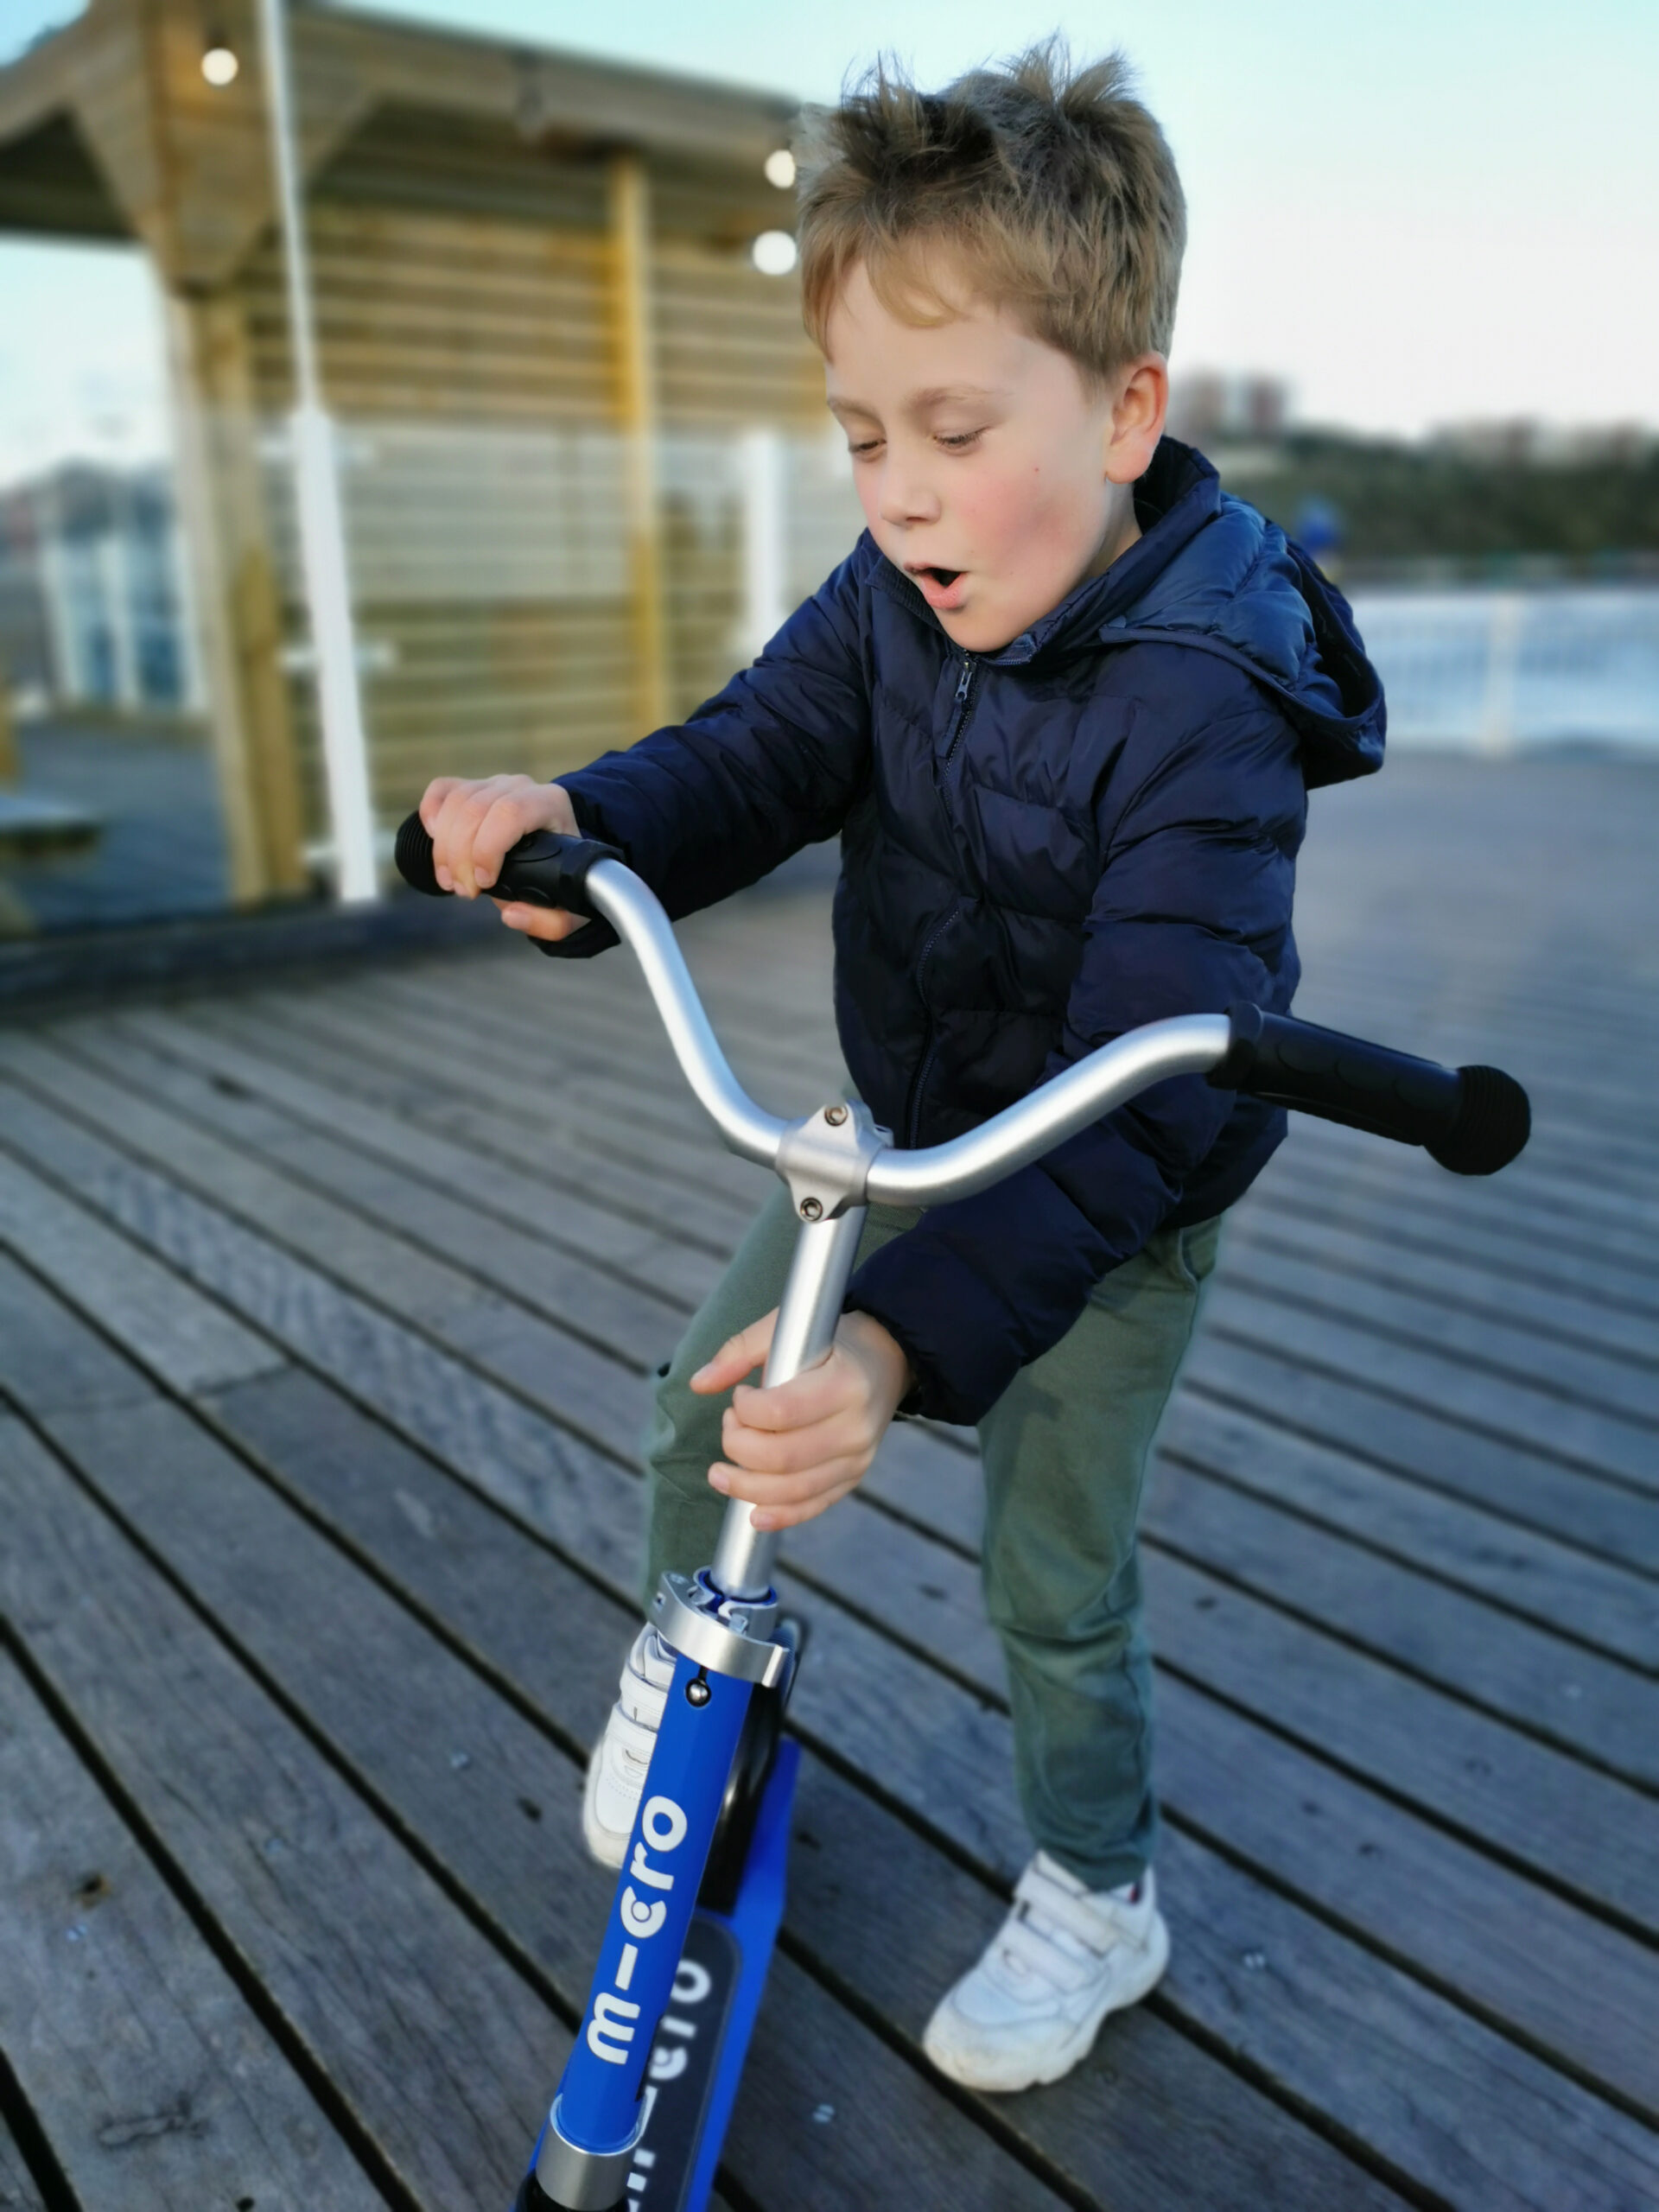 Cruiser LED Micro Scooter, Micro Scooters, Made for Adventure, Made in Switzerland, Scooters, Scooting, the Frenchie Mummy, Frenchie Xmas Giveaways 2023, Giveaway, Competition, Win, Outdoors Fun